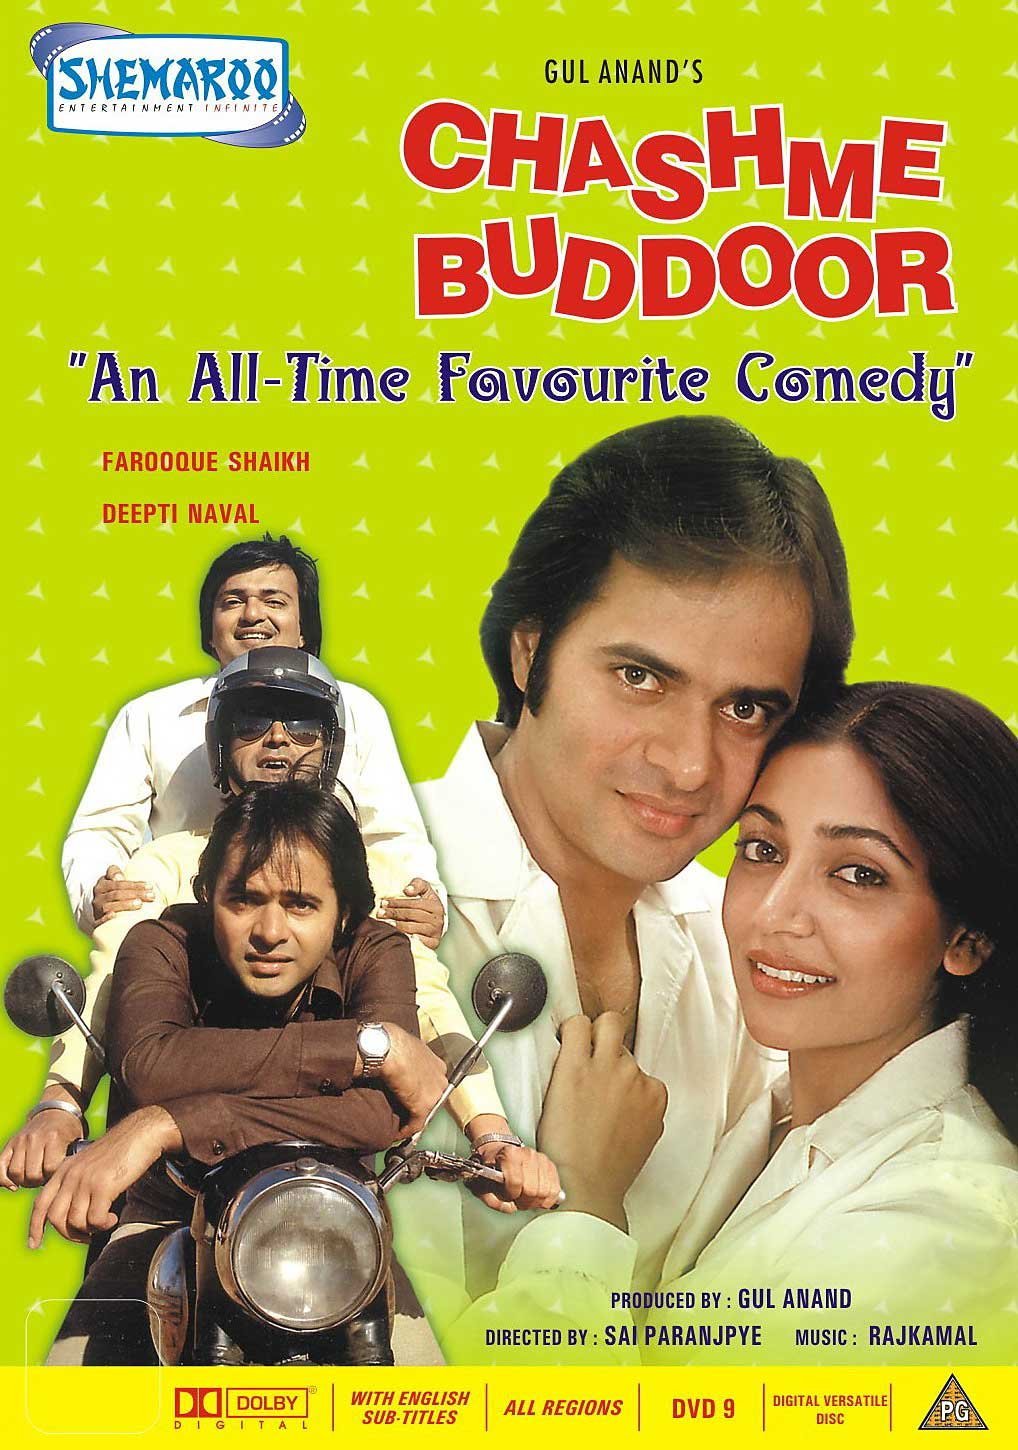 35 Old But Gold Hindi Comedy Movies Of All Time: Bollywood, Netflix, Amazon  Prime